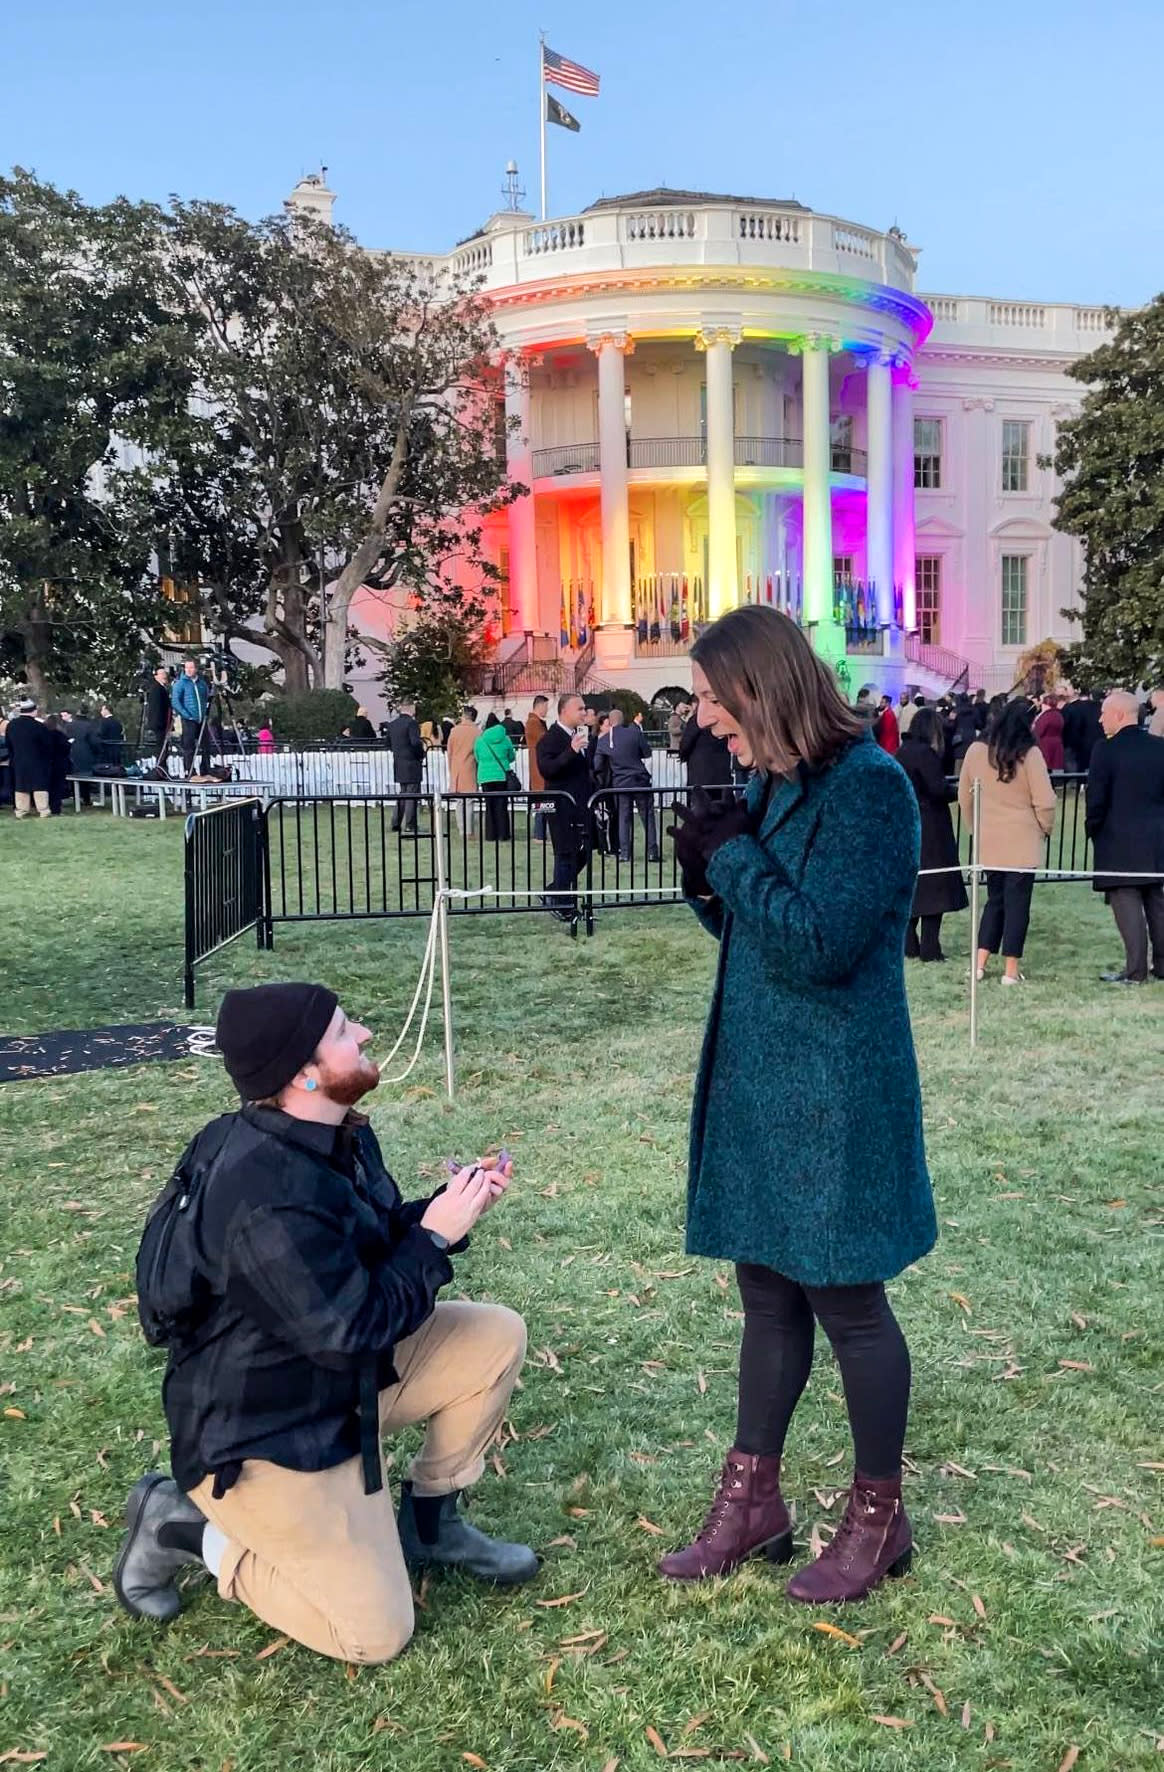 Vermont Rep. Taylor Small got engaged to her partner, Carsen Russell, after the Respect for Marriage Act signing at the White House on Tuesday. (Courtesy Rep. Taylor Small)